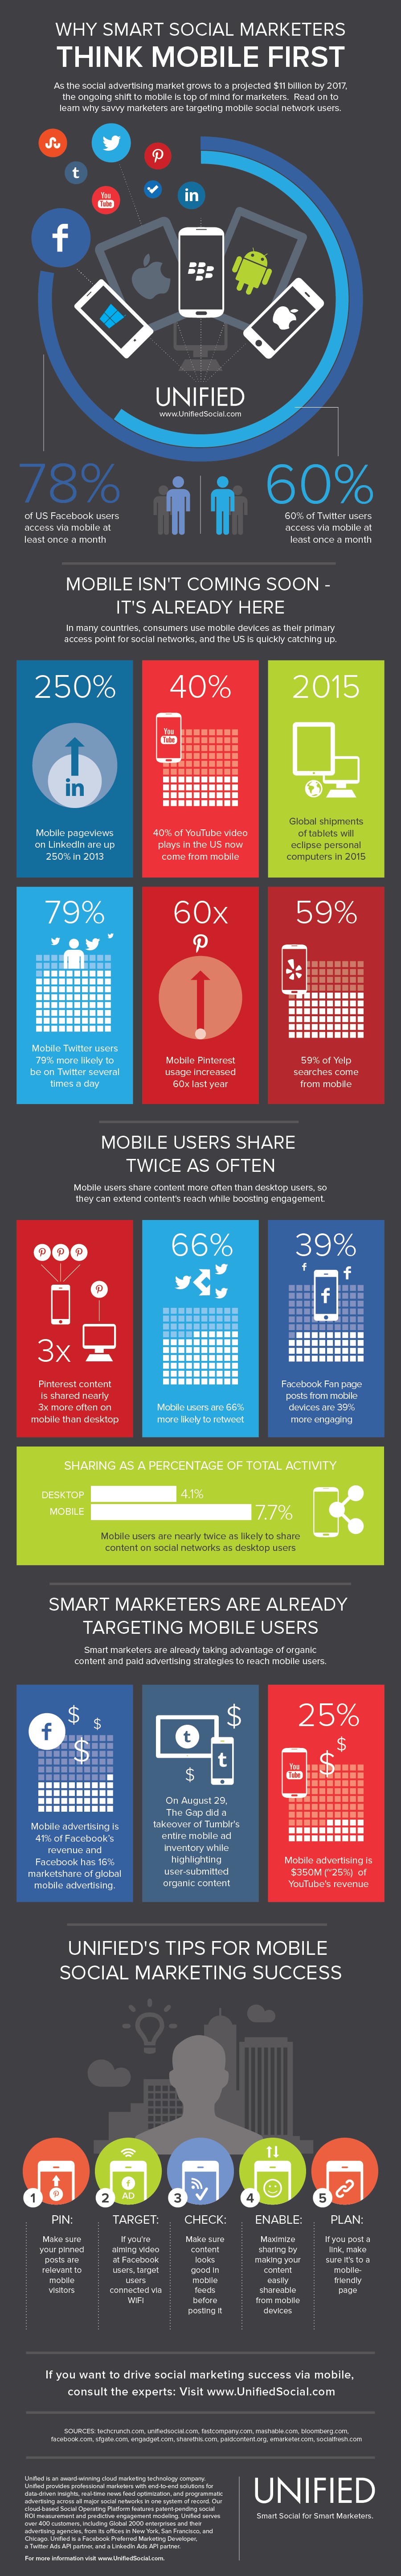 Think Mobile First